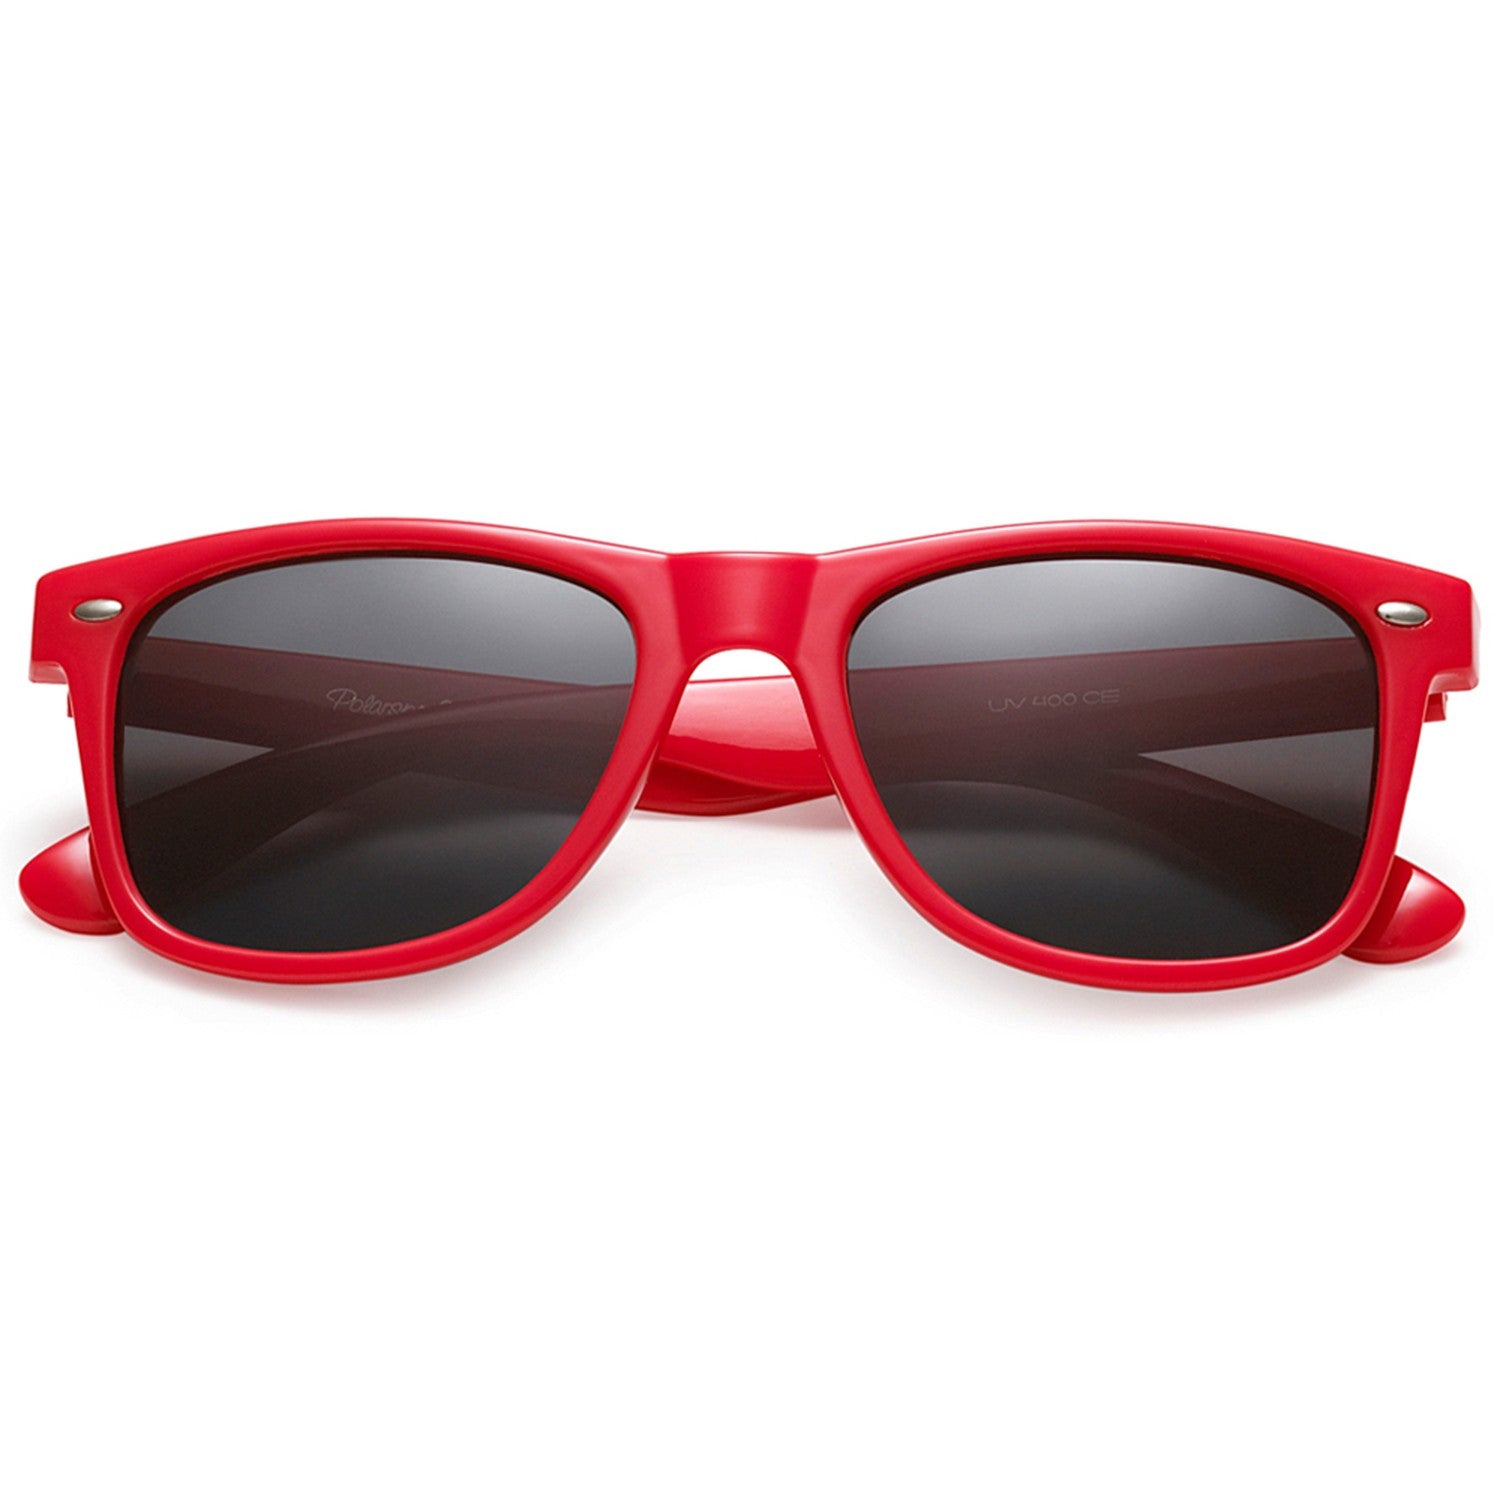 Polarspex Polarized 80's Retro Style Unisex Sunglasses with Scarlet Red Frames and Smoke Lenses